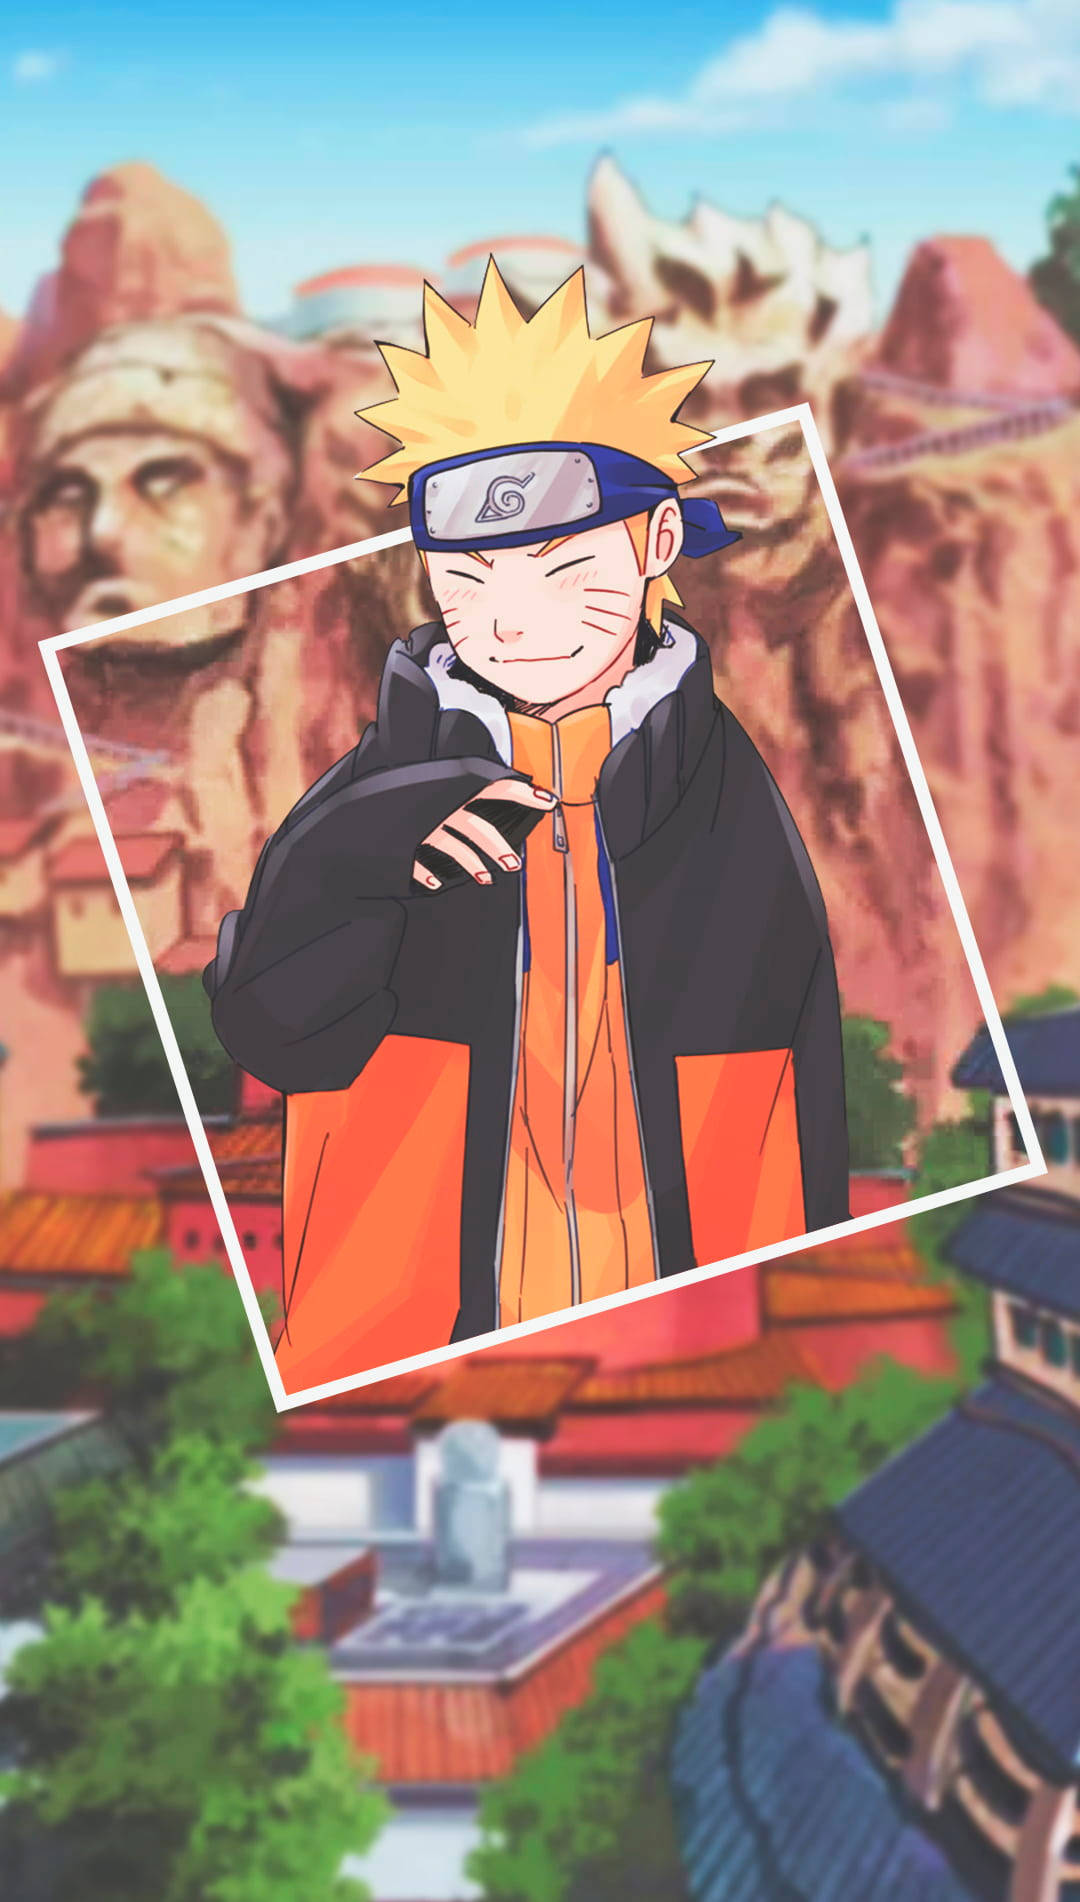 Free Naruto Iphone Wallpaper Downloads, [200+] Naruto Iphone Wallpapers for  FREE 